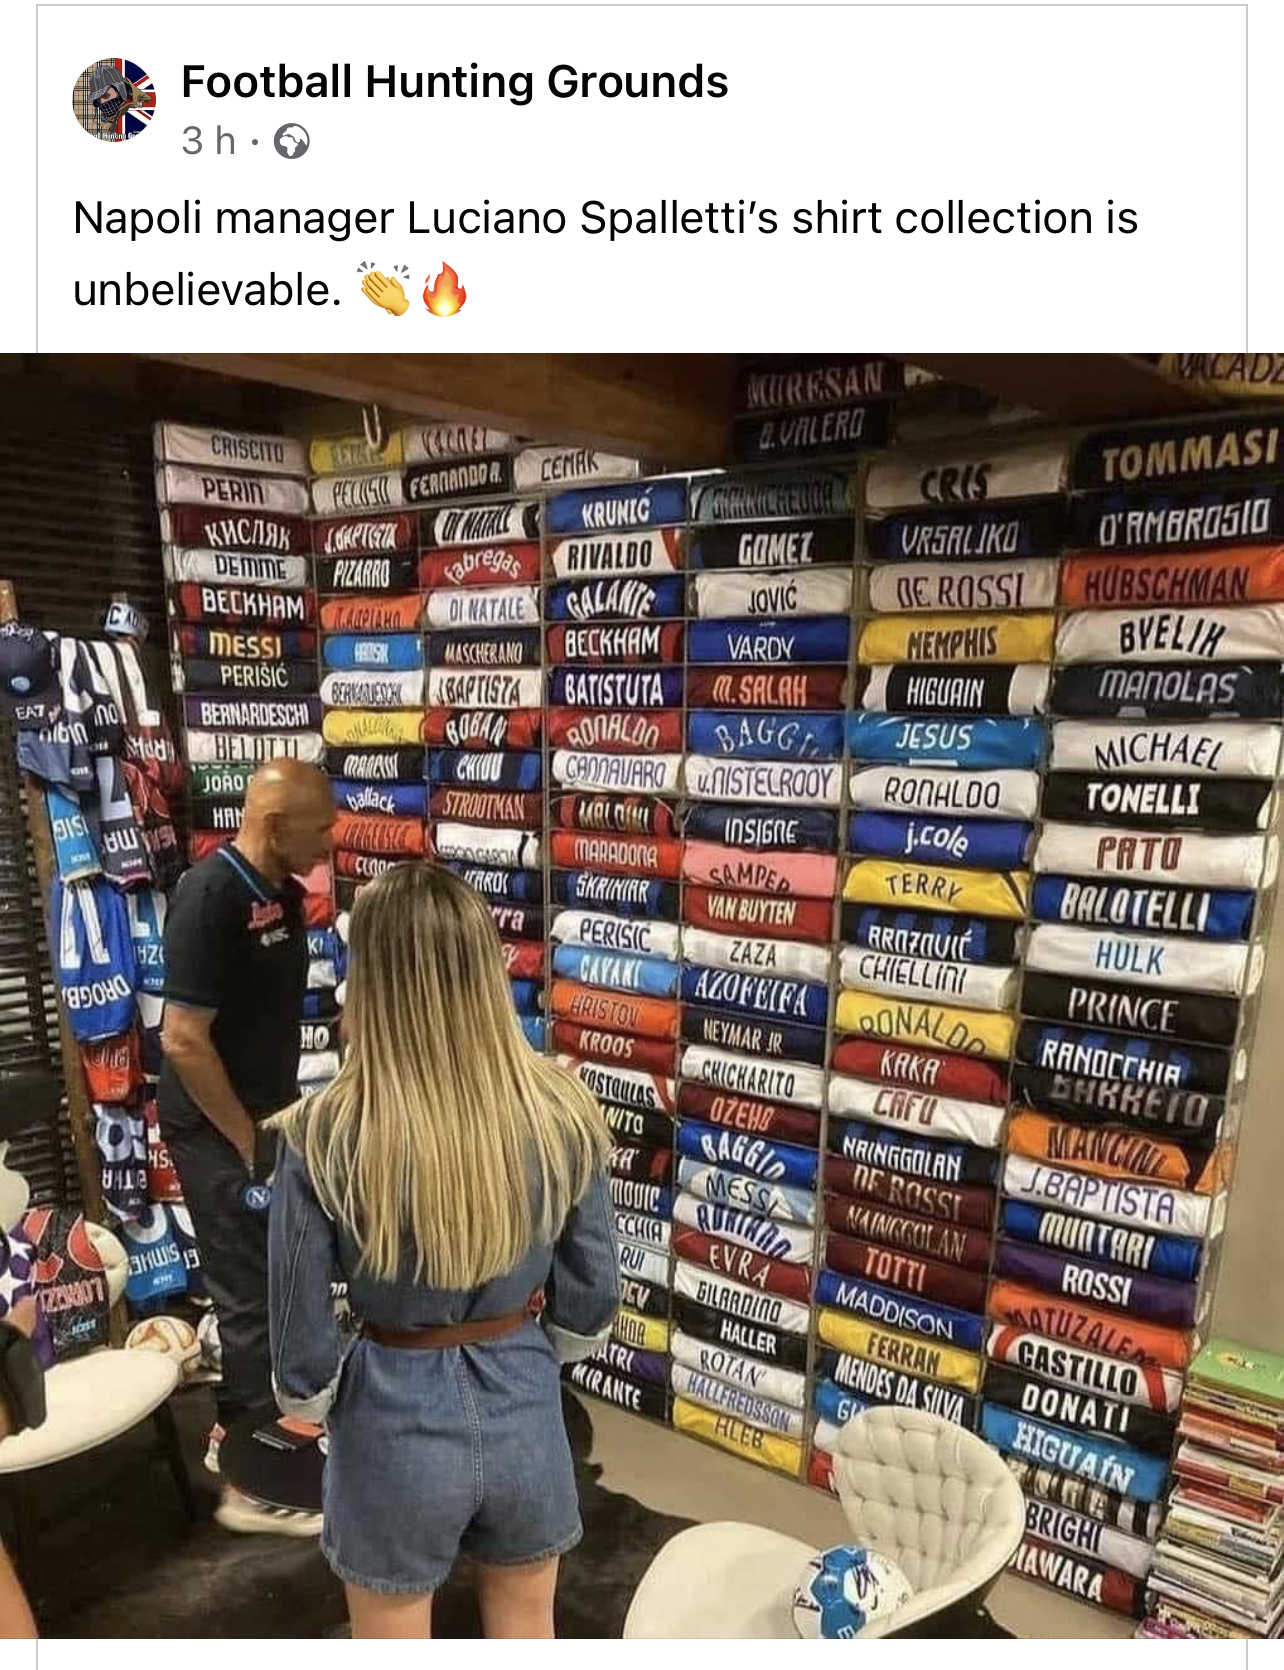 Napoli manager Lucian Spalletti's shirt collection is unbelivable IMG 5306  — Postimages